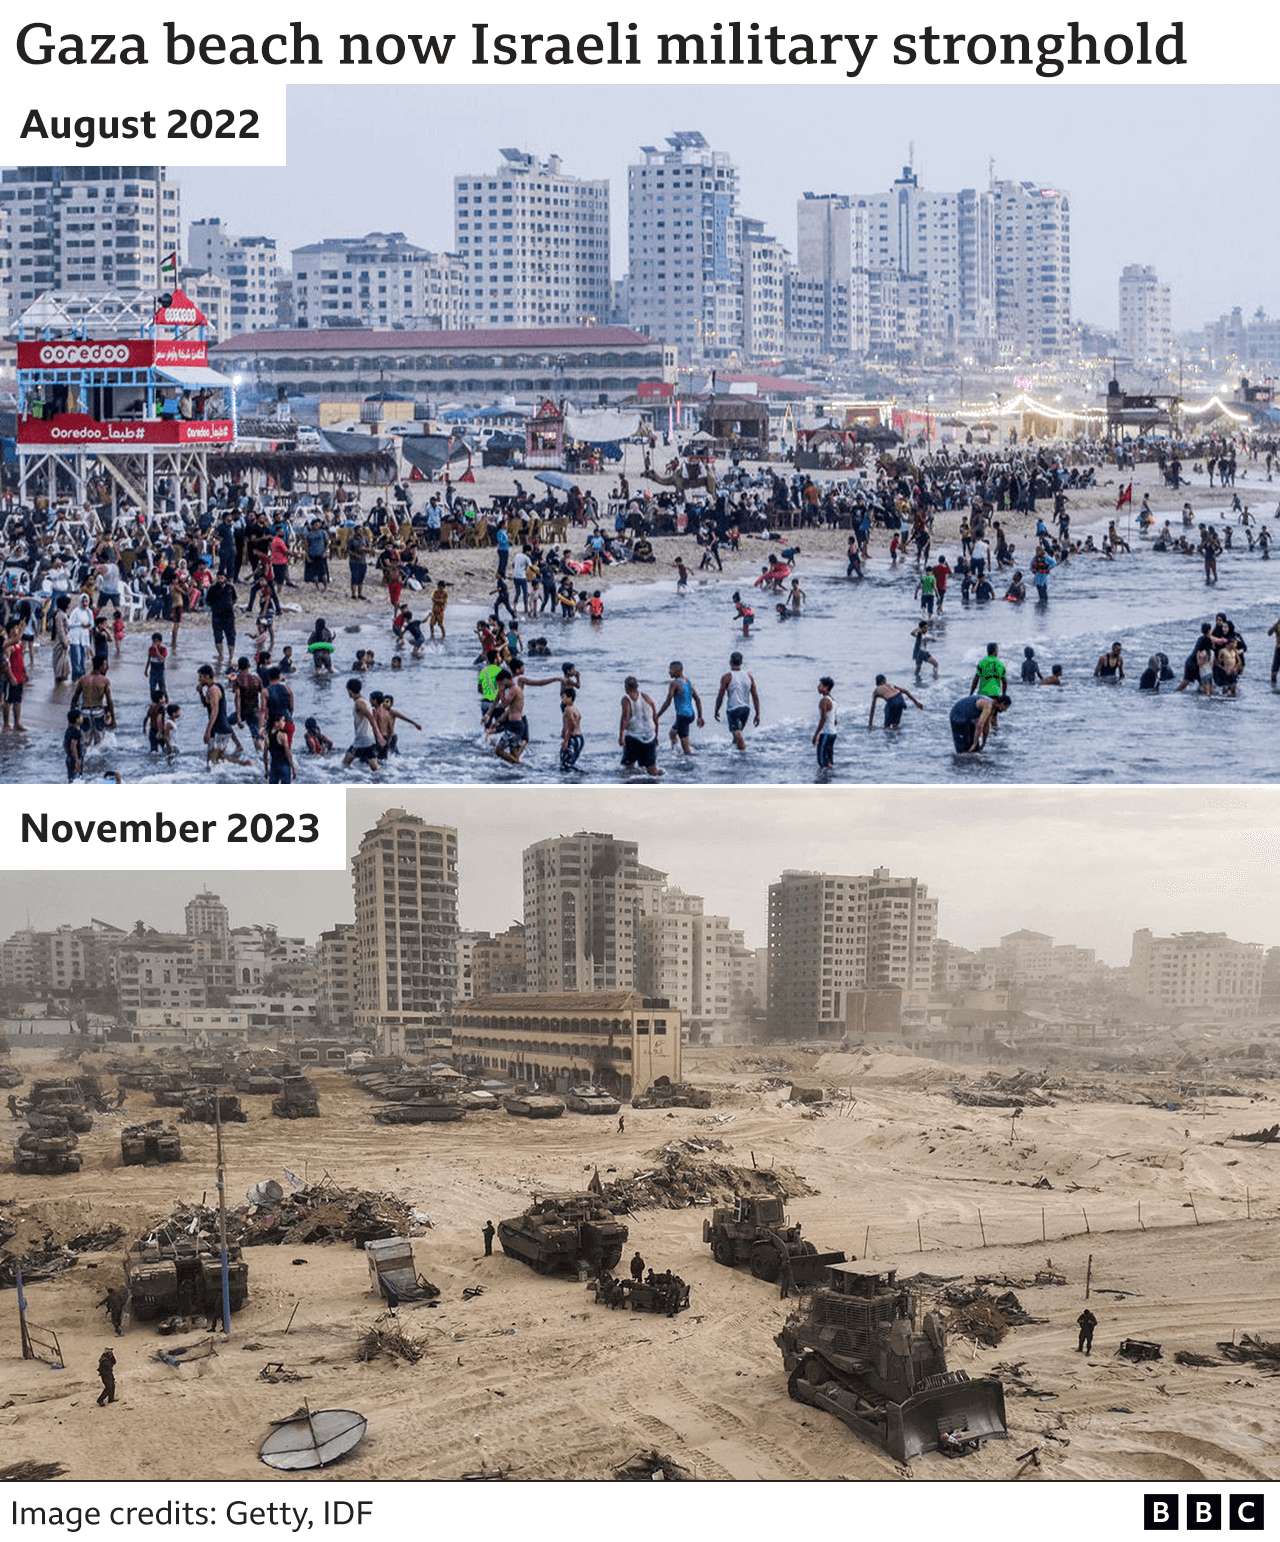 Image released by the Israeli Defense Forces shows tanks and armoured bulldozers on the beach near Gaza City. A photo from last summer shows people making the most of the beach during a hot day in Gaza, with food stands, parasols and children splashing in the sea.